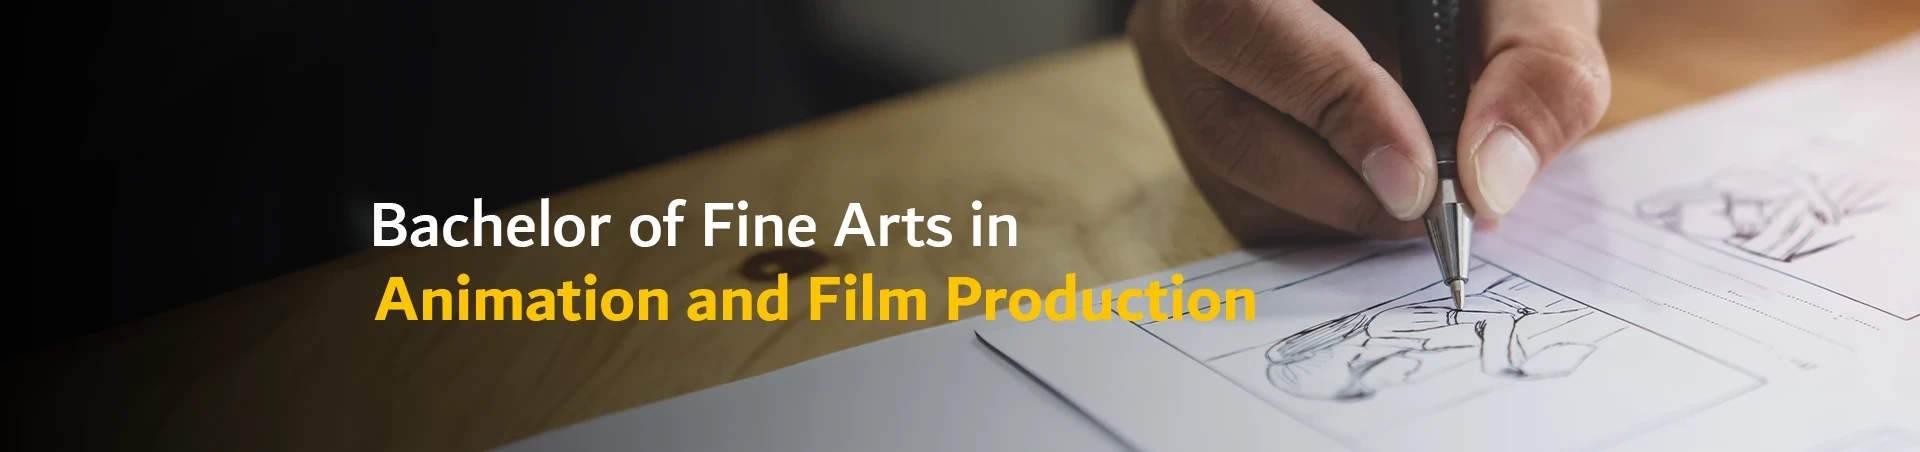 Bachelor of Fine Arts in Animation and Film Production